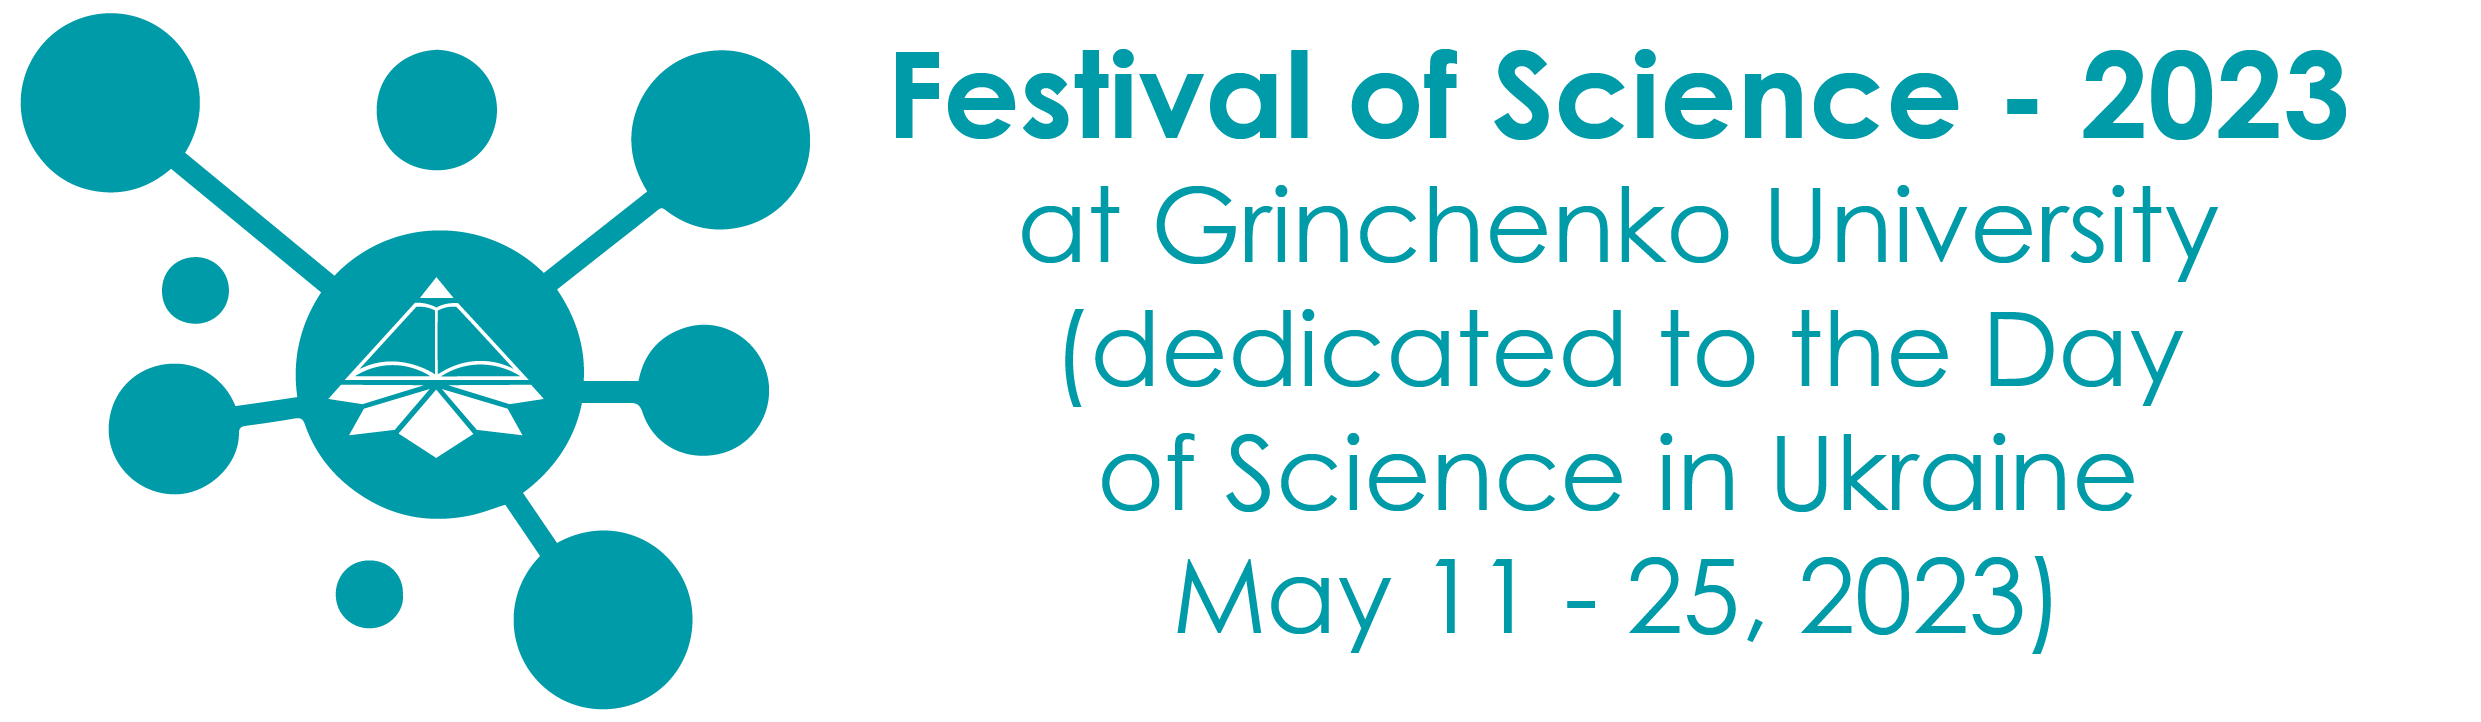 Festival of Science 2023